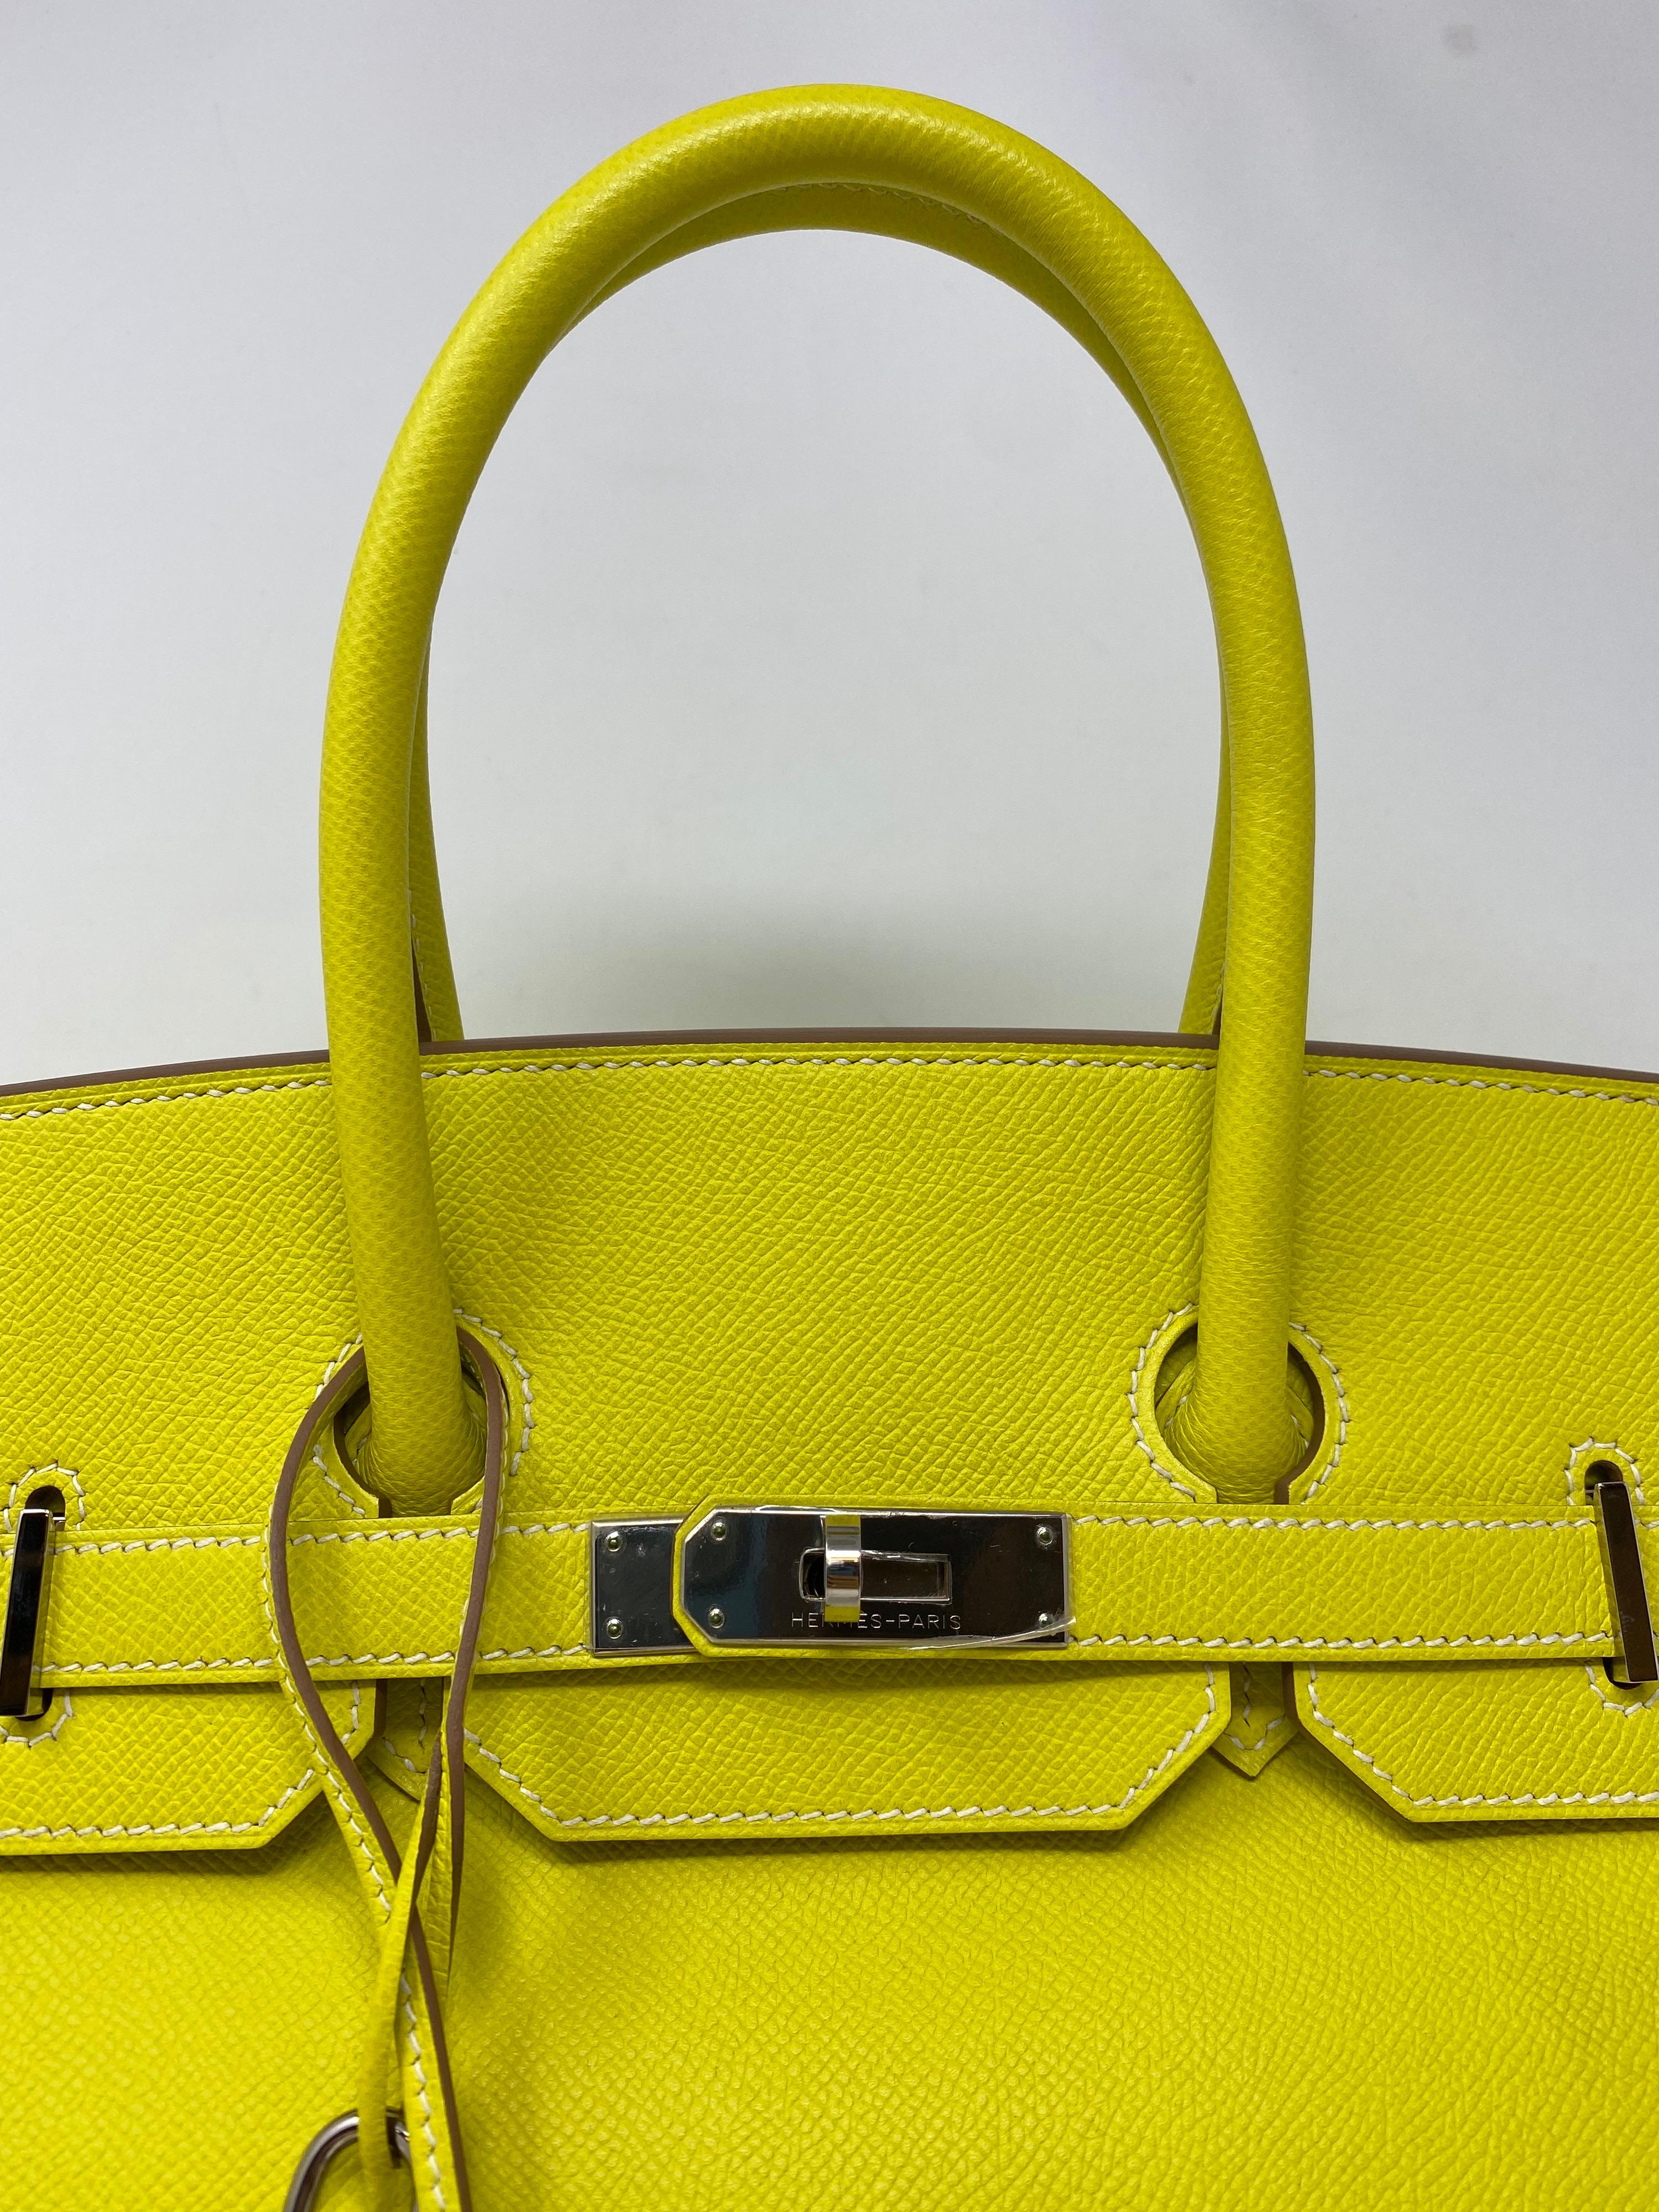 Hermes Birkin Lime Candy  35 Bag. Exterior bright lime yellow and interior white. Beautiful bag in epsom leather. Palladium hardware. Looks like new condition. Plastic is still on hardware. Includes clochette, lock, keys, and dust cover. Rare color.